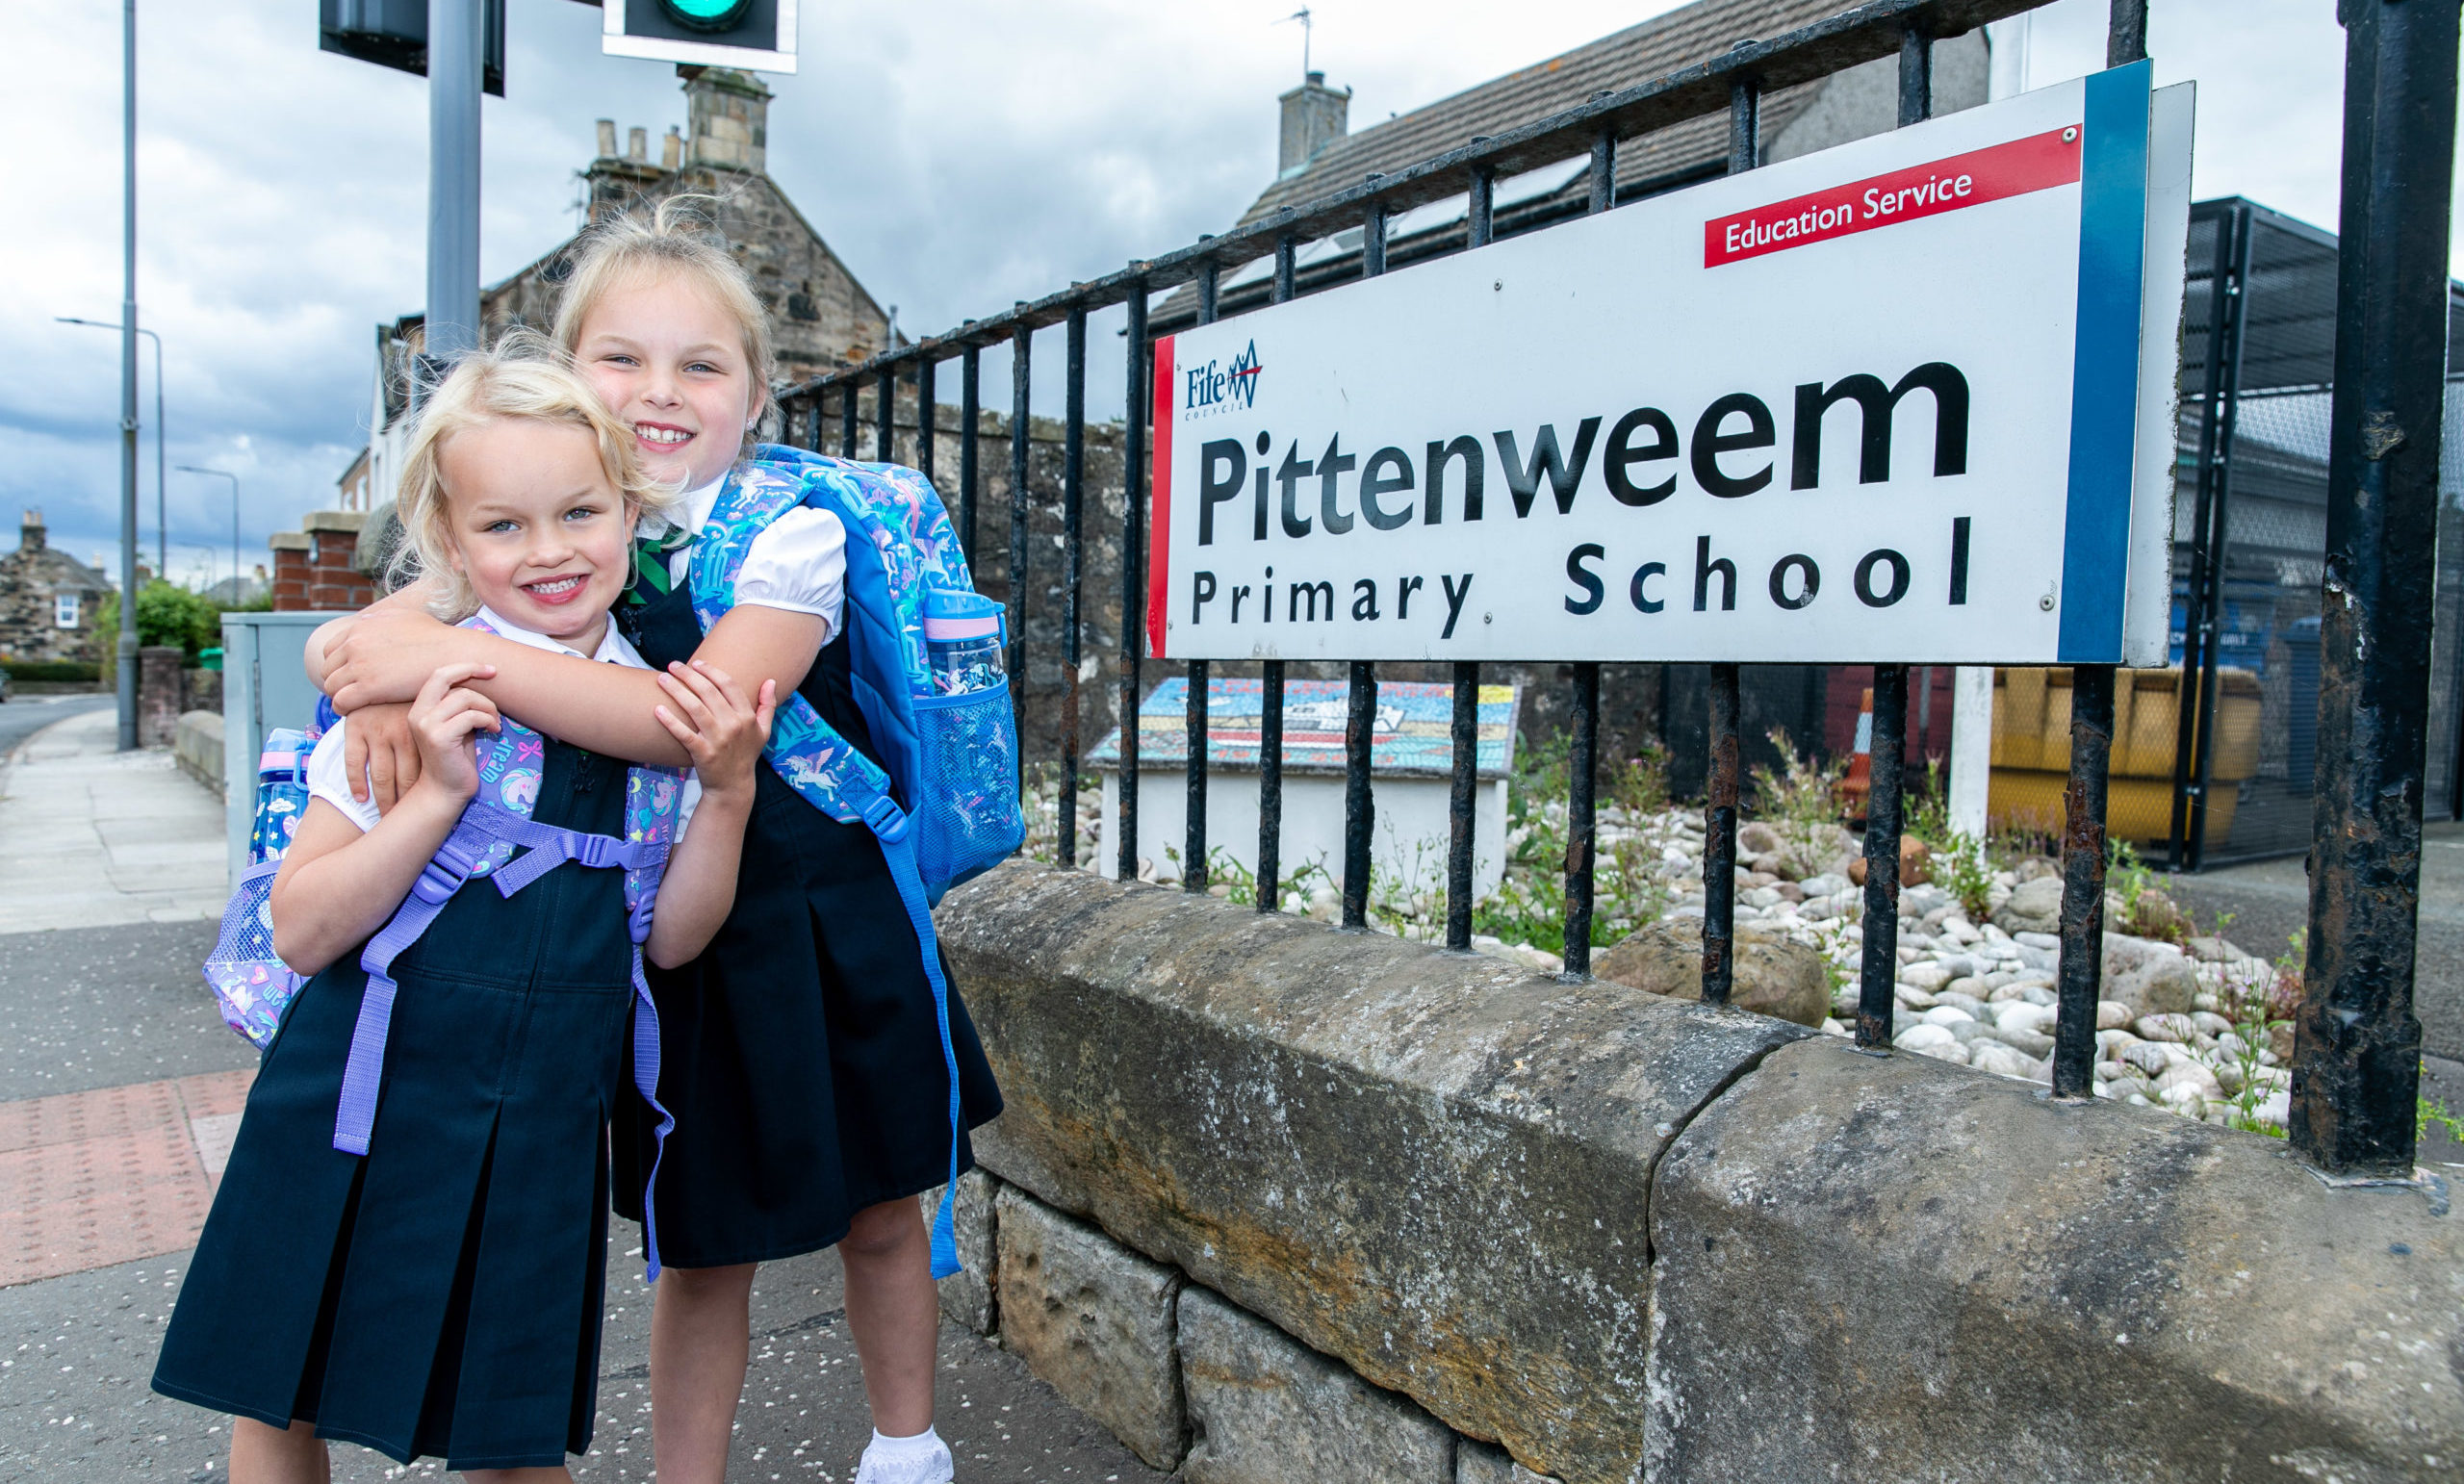 Emily Hughes, 5, and sister, Evie, 7, are excited to go to Pittenweem Primary School.